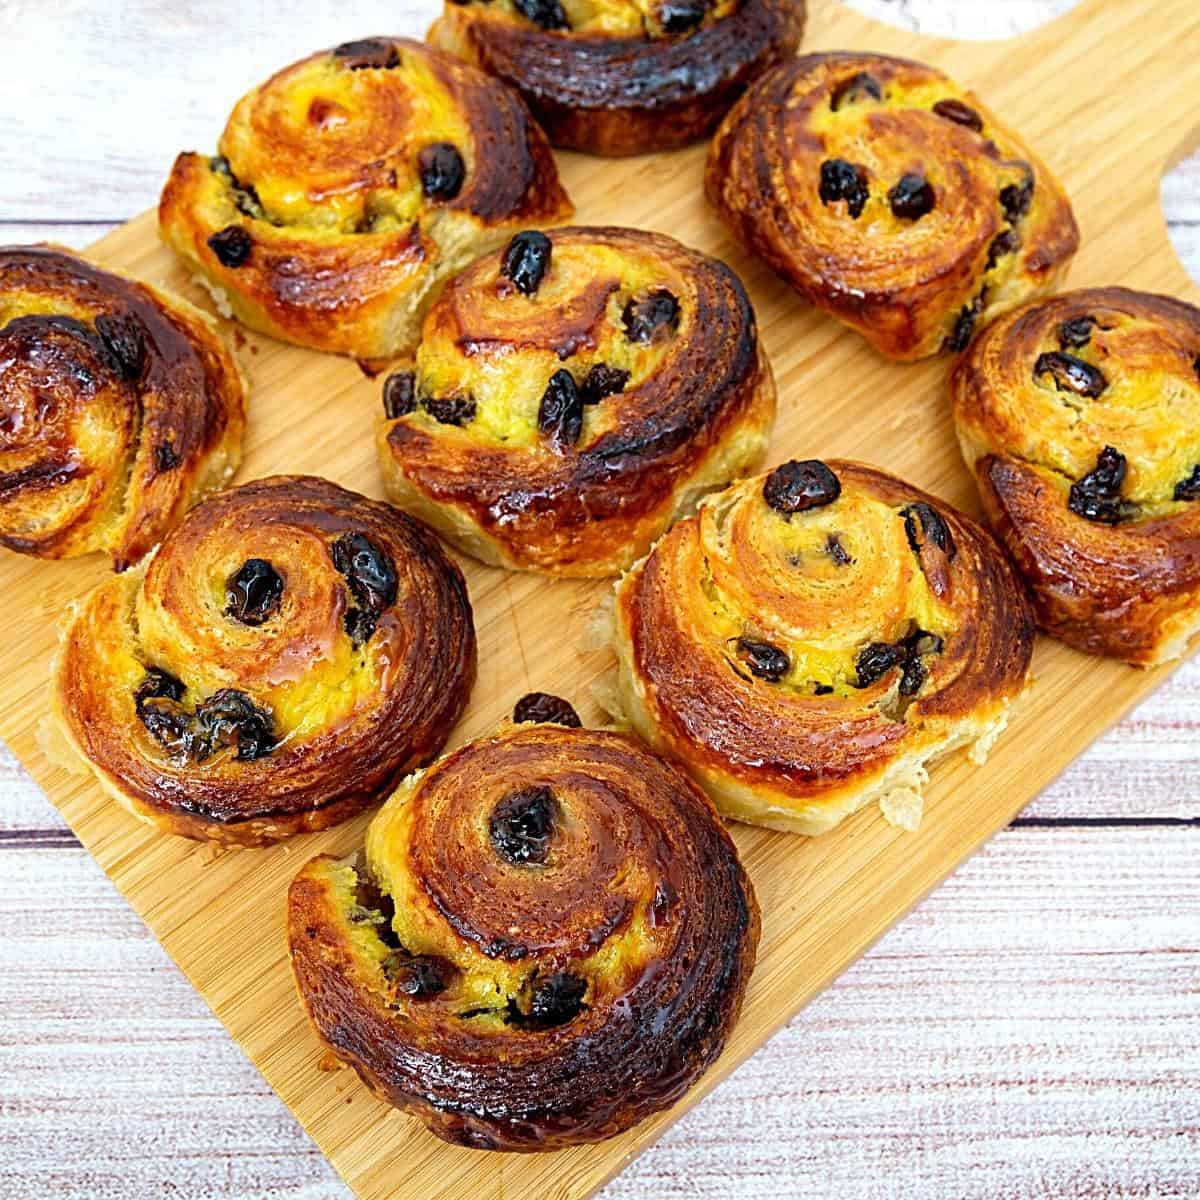 Pain au raisin danishes on a wooden board.